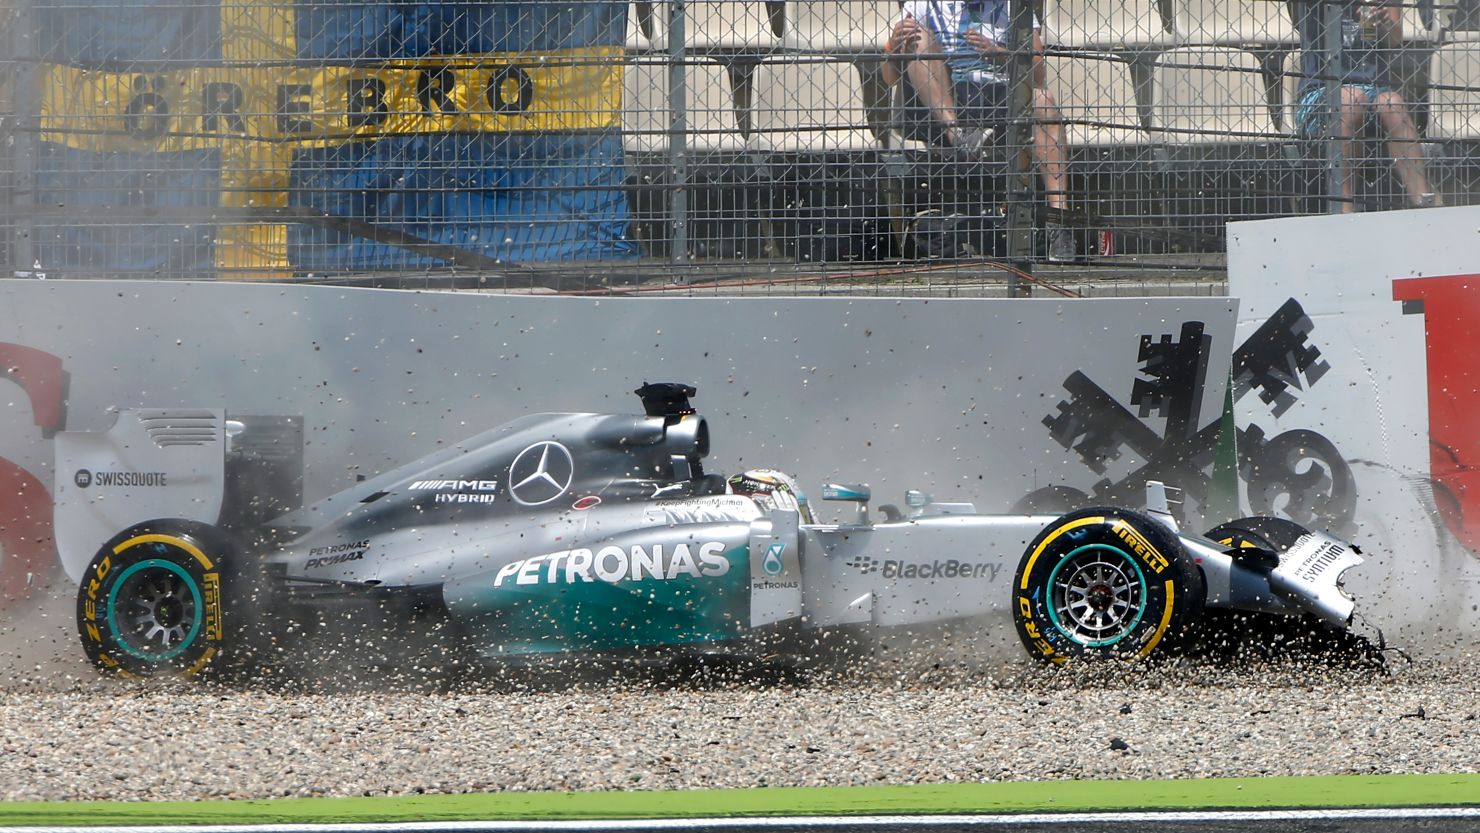 Lewis Hamilton's car skids over the gravel trap as he crashes during qualifying for the German Grand Prix on Saturday.